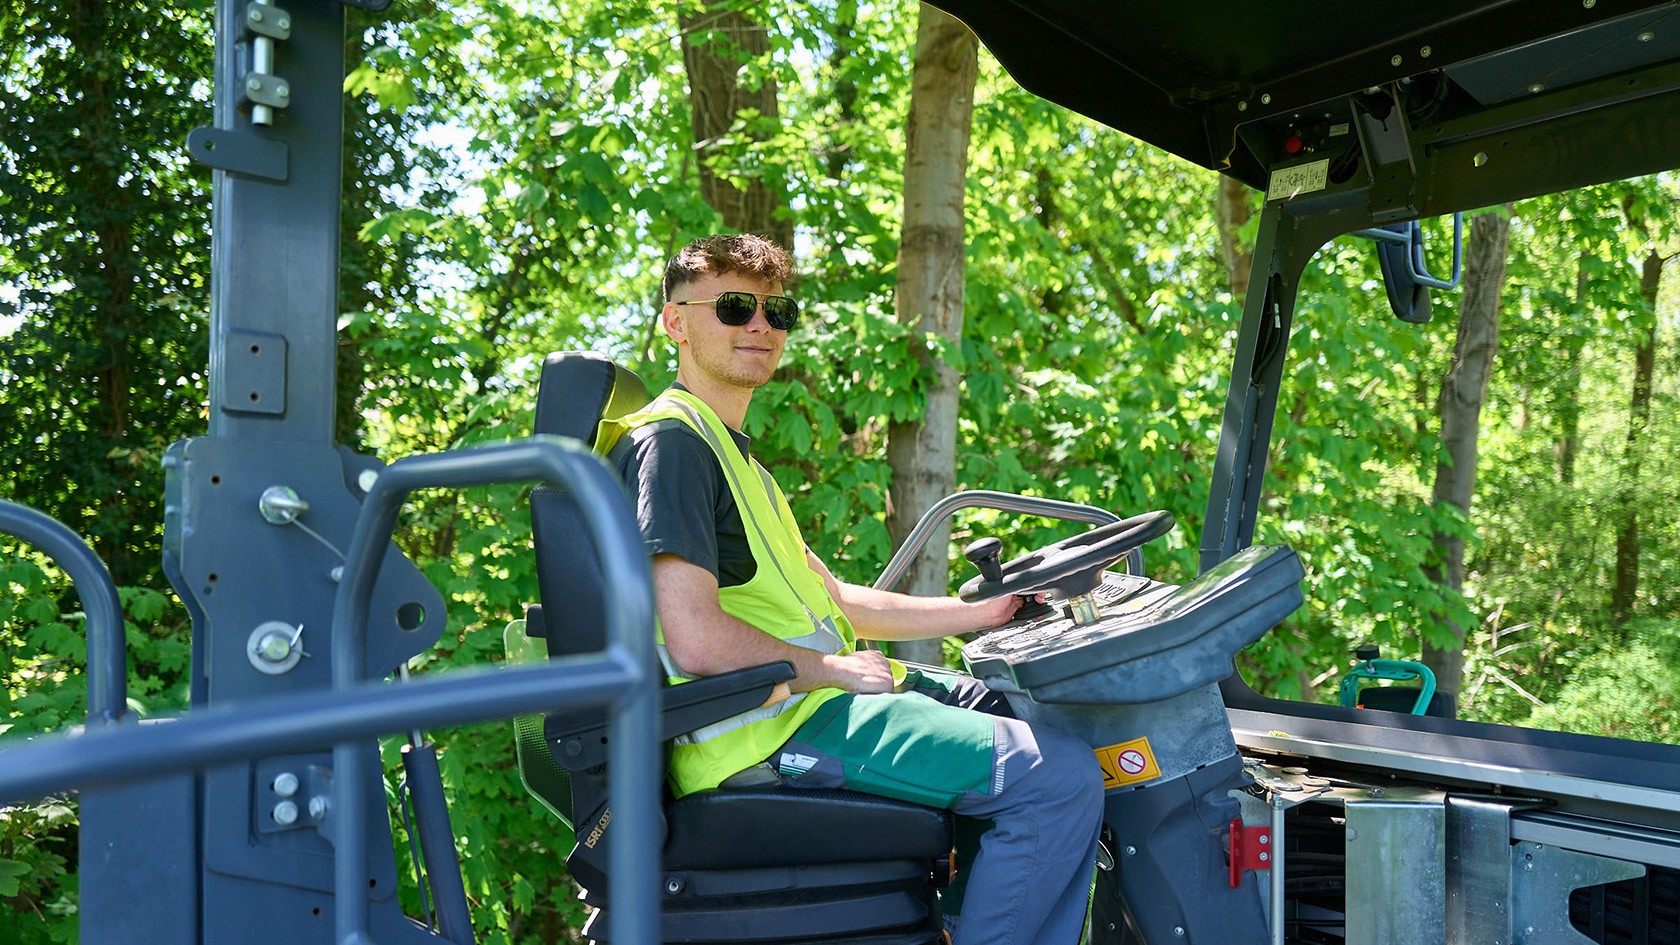 A trainee at the wheel of a Vögele paver